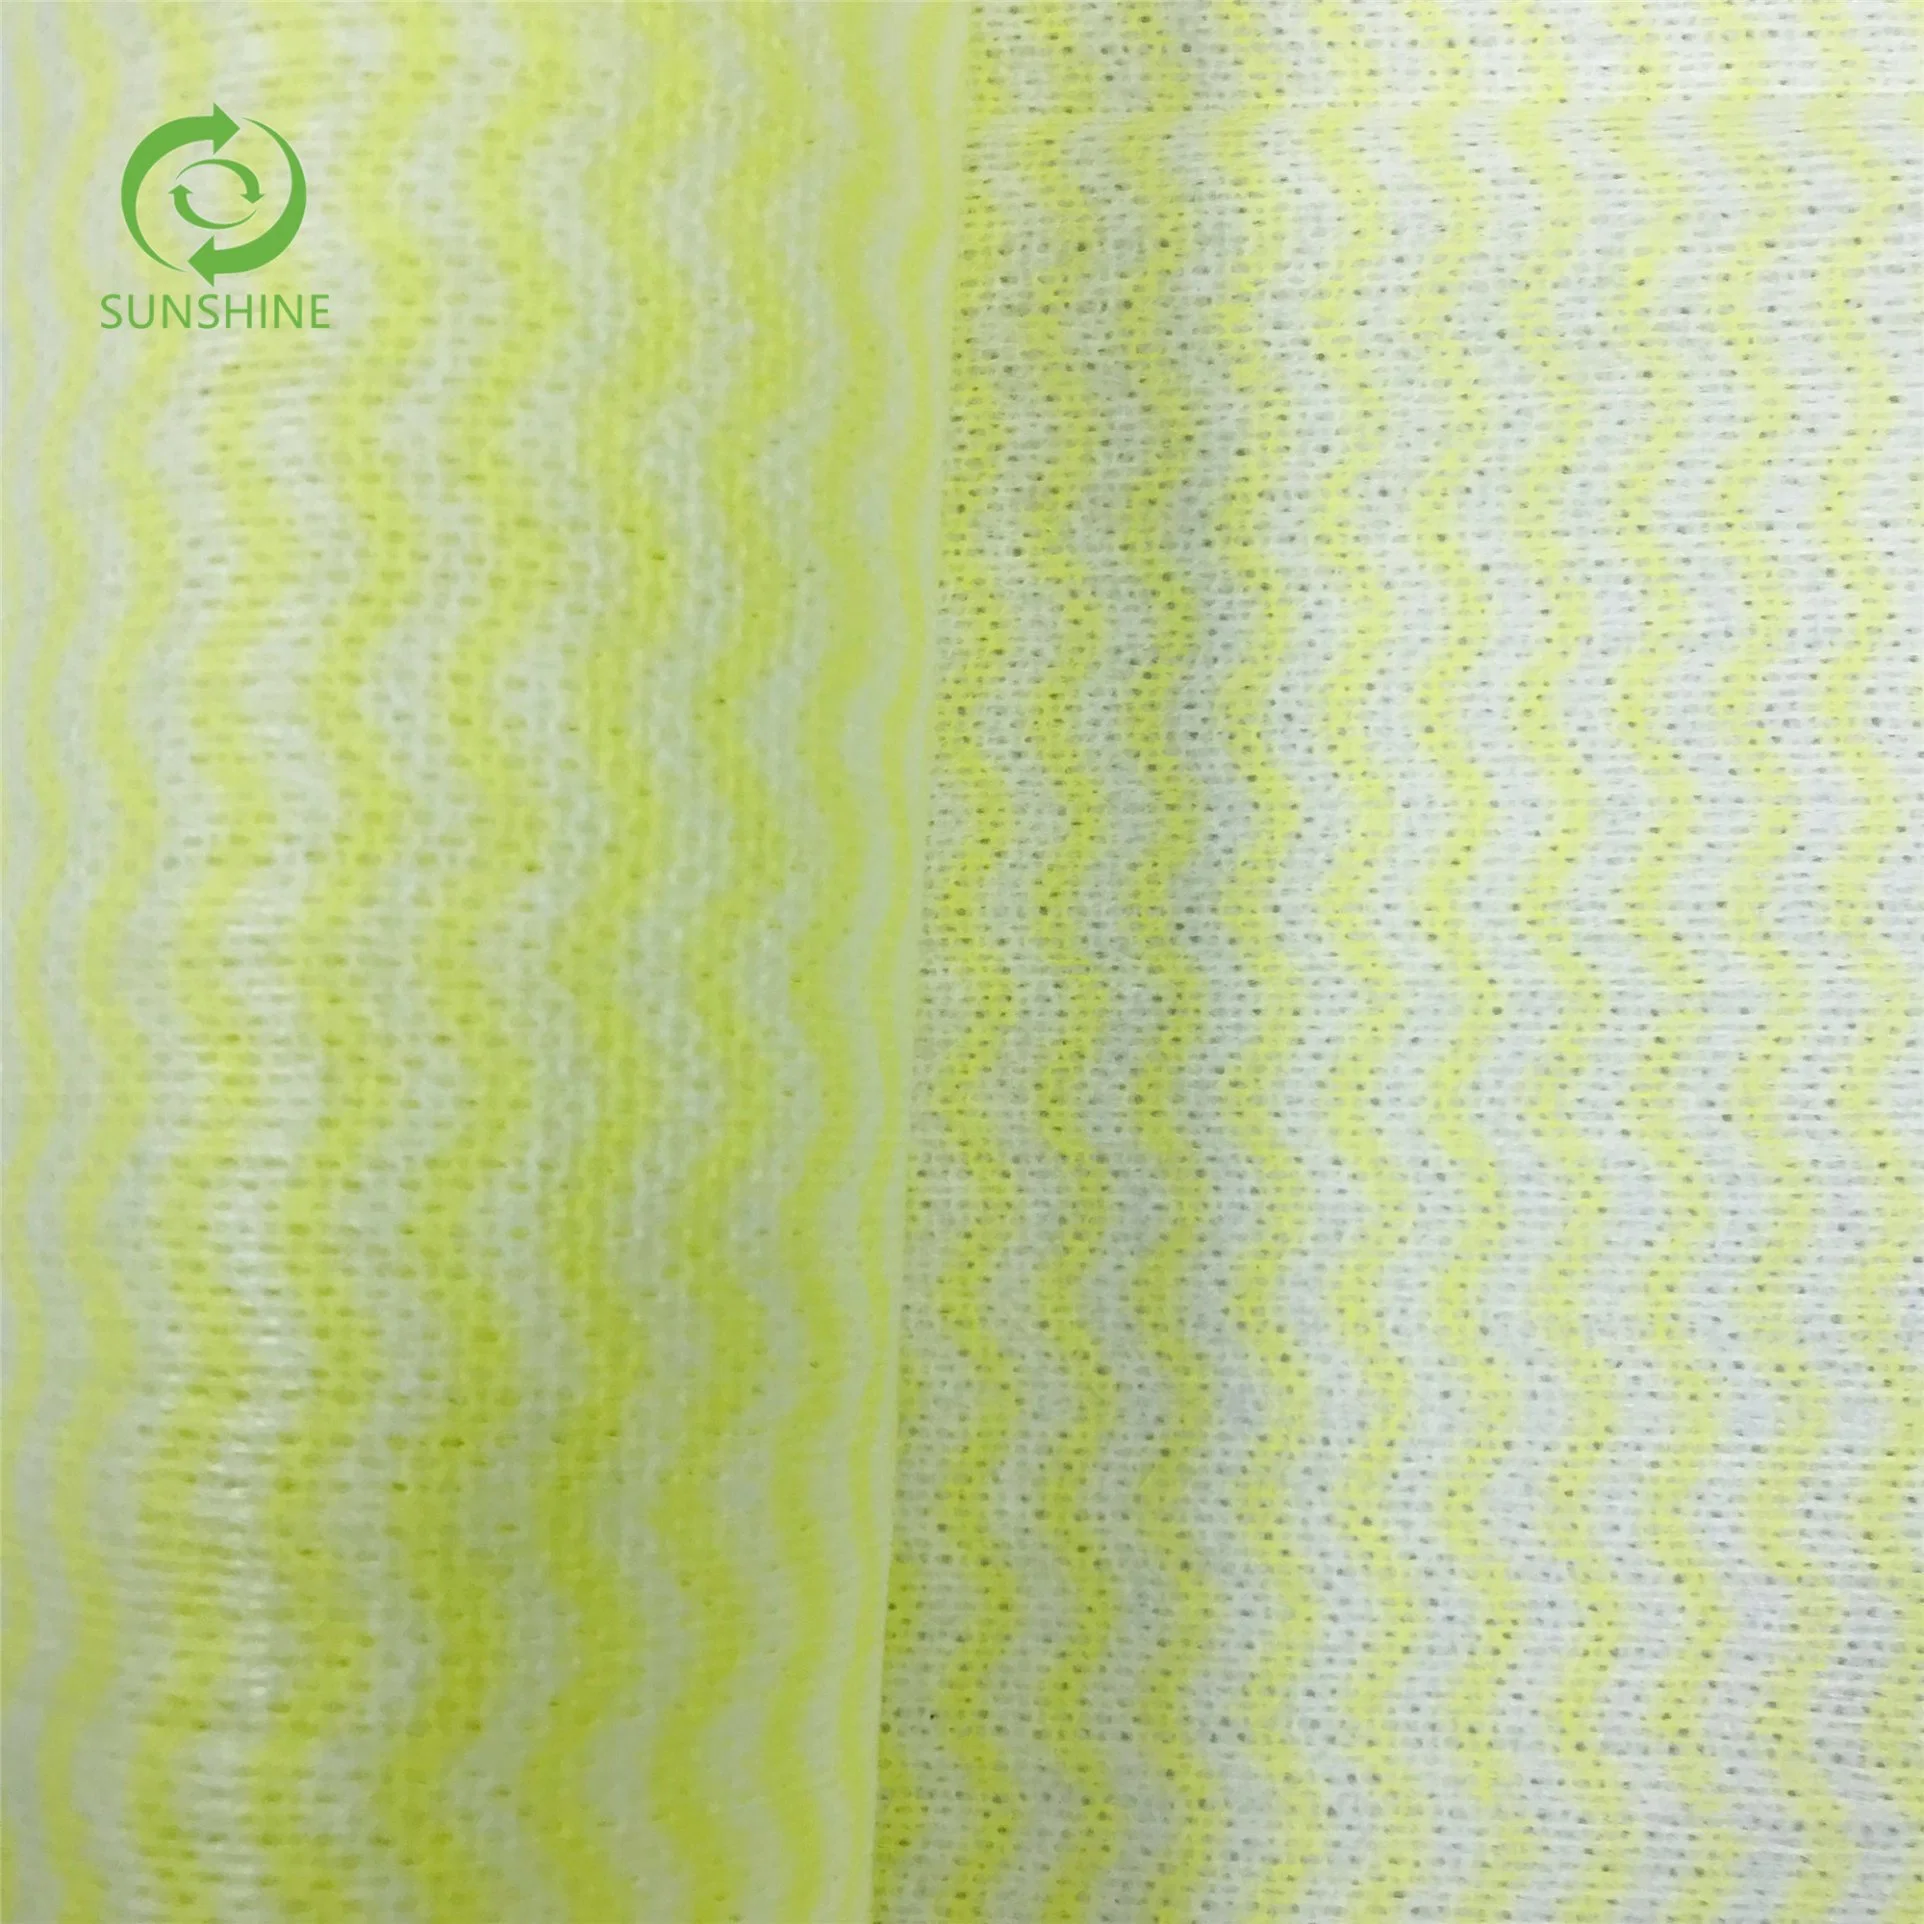 Biodegradable Nonwoven Fabric Cloth Item Spunlace Nonwoven Fabric for Kitchen Cleaning